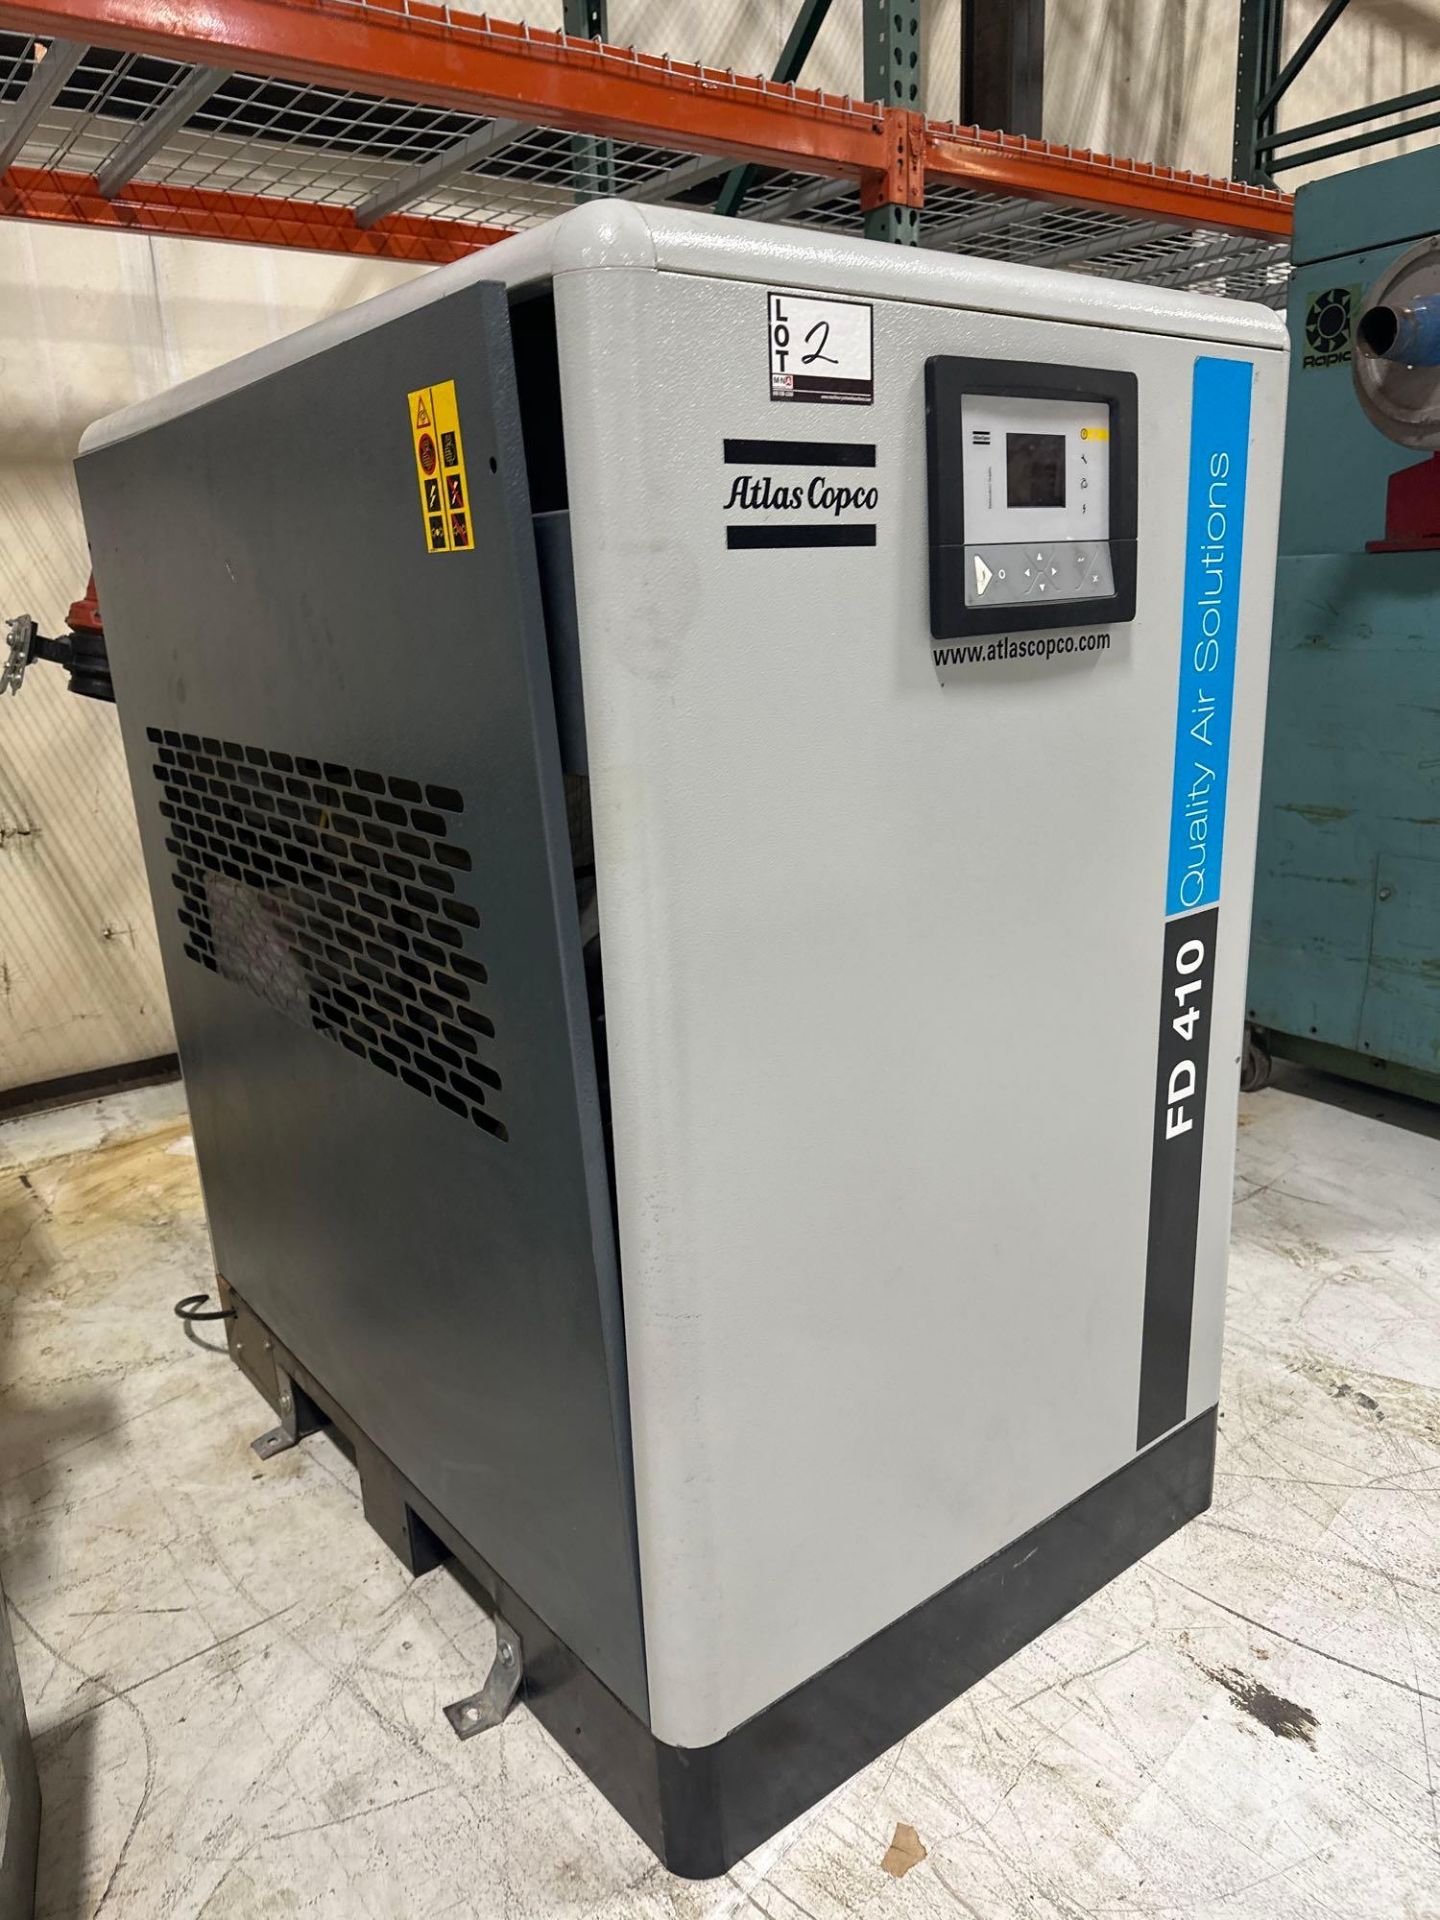 Atlas Copco FD410 Quality Air Soultions Air Dryer, s/n ITJ004670 - Image 2 of 6